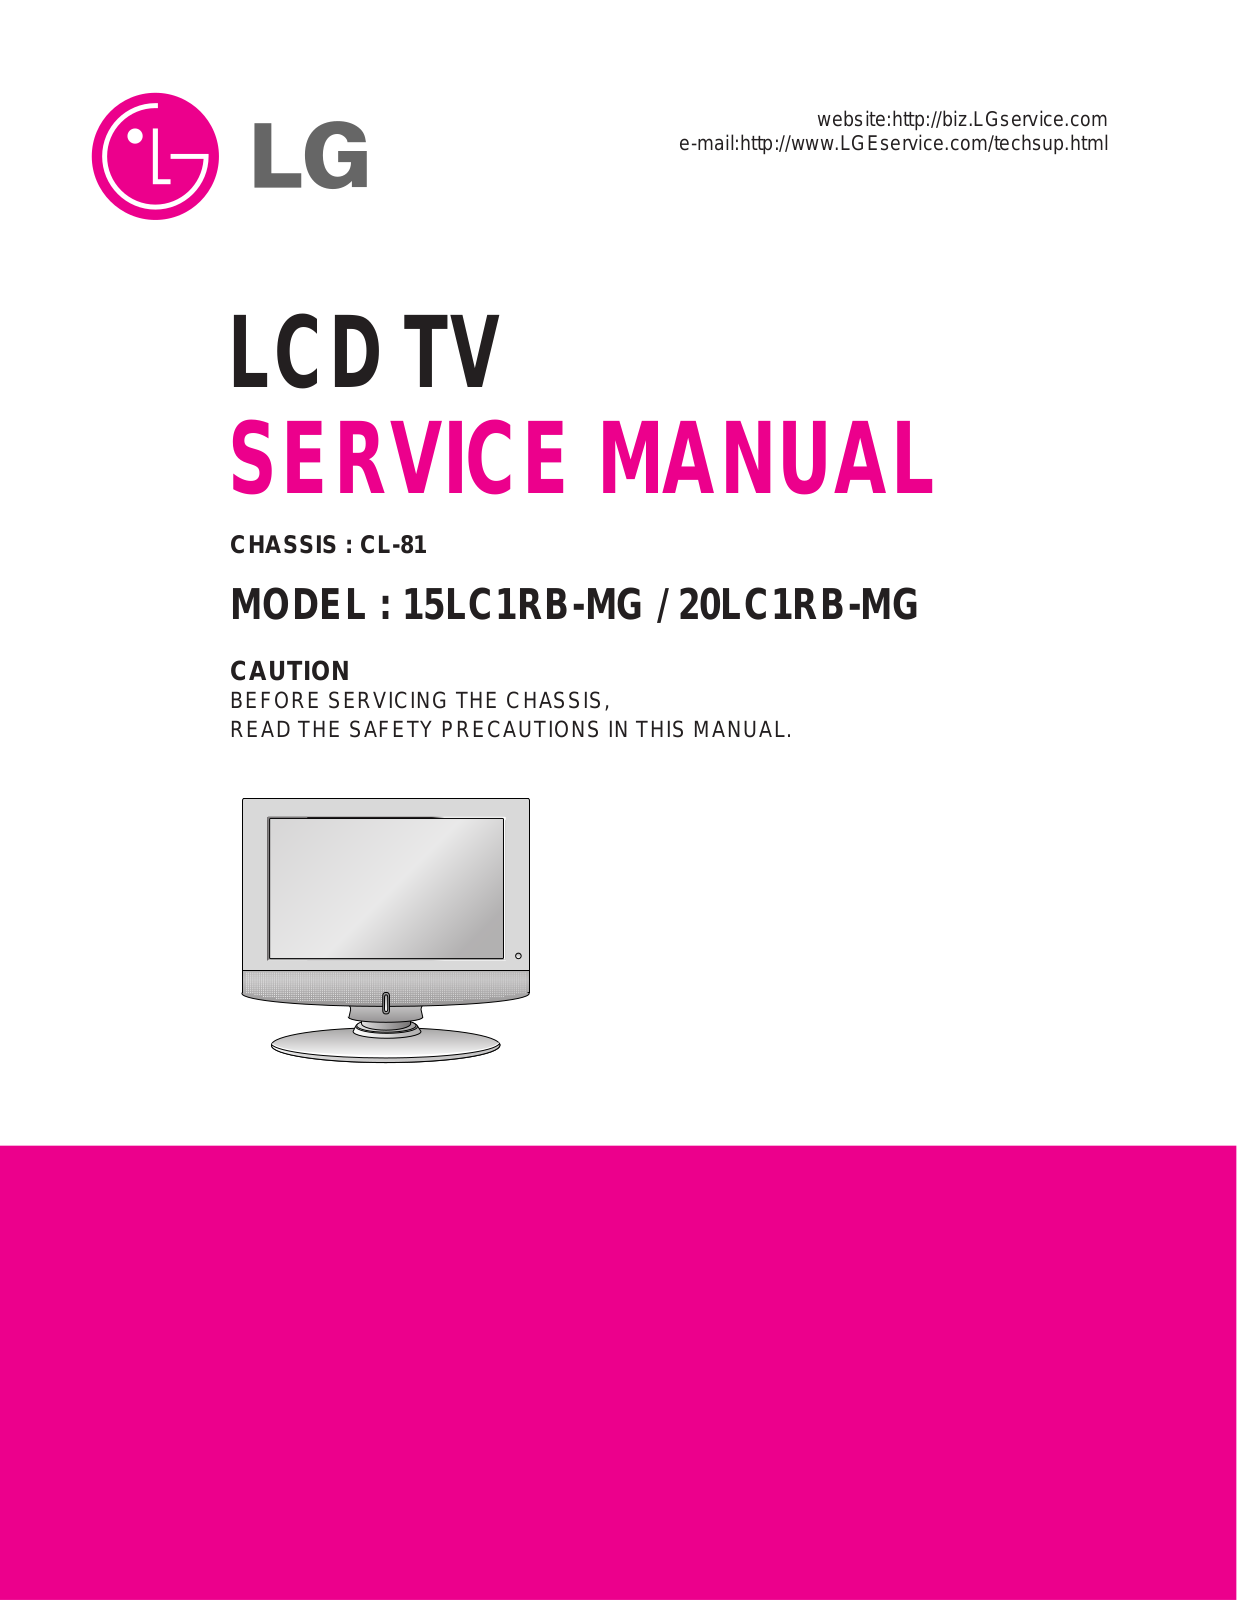 LG 15lc1r, 20lc1rb schematic